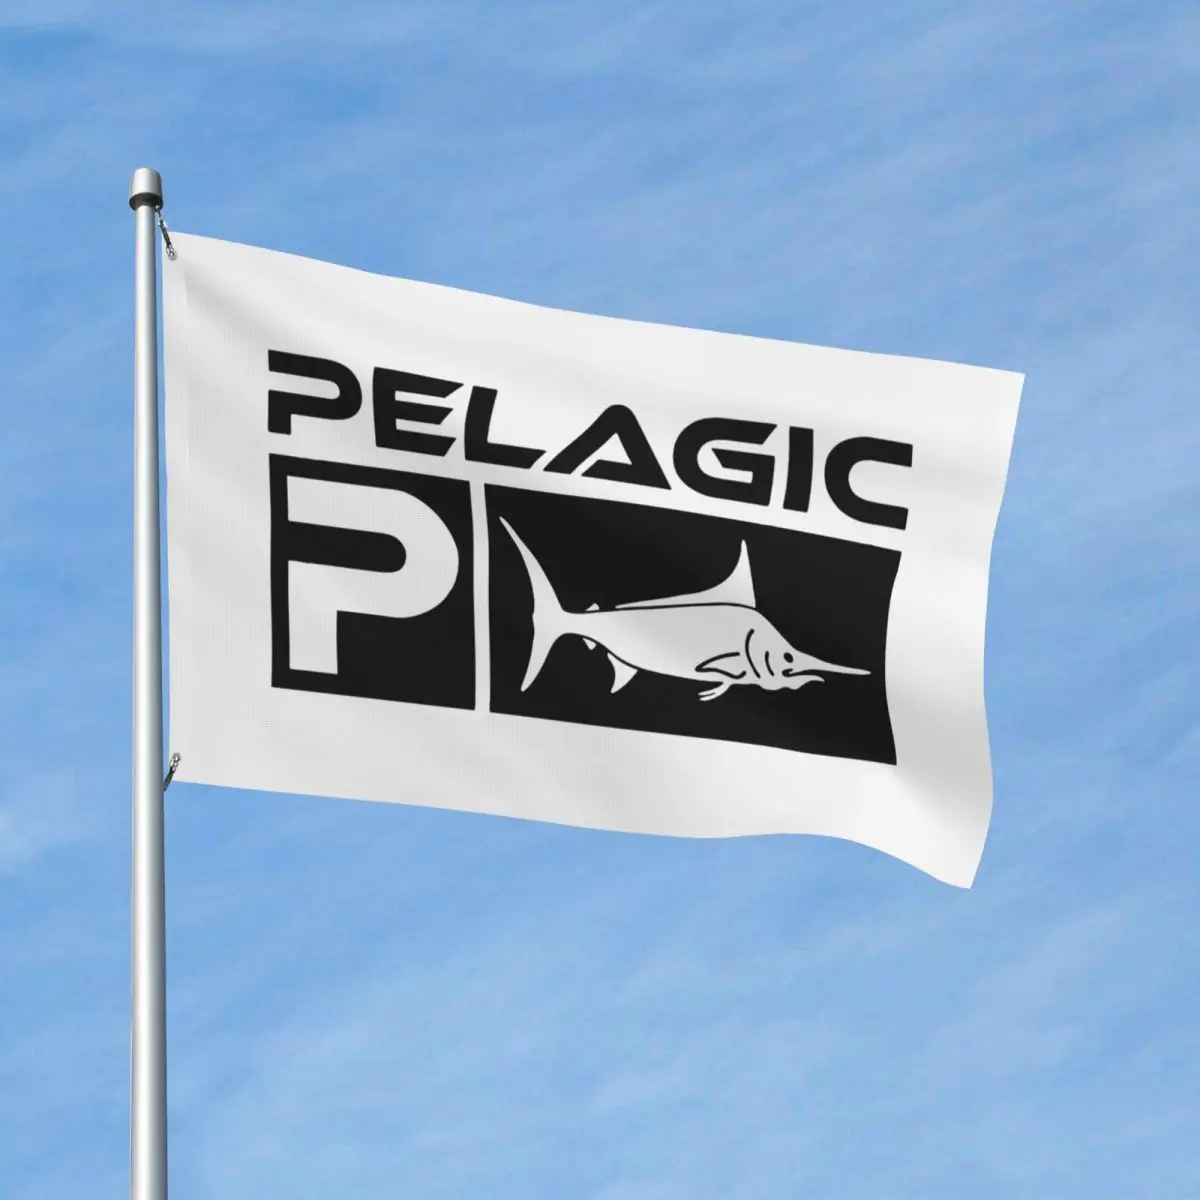 https://ae01.alicdn.com/kf/S2e09b58eef654548a36638e9a3d58c68I/Pelagic-Fishing-Flag-Double-Sided-Outdoor-Banner-Marine-All-Weather-Home-Room-Dorm-Wall-Decor-3x5.jpg